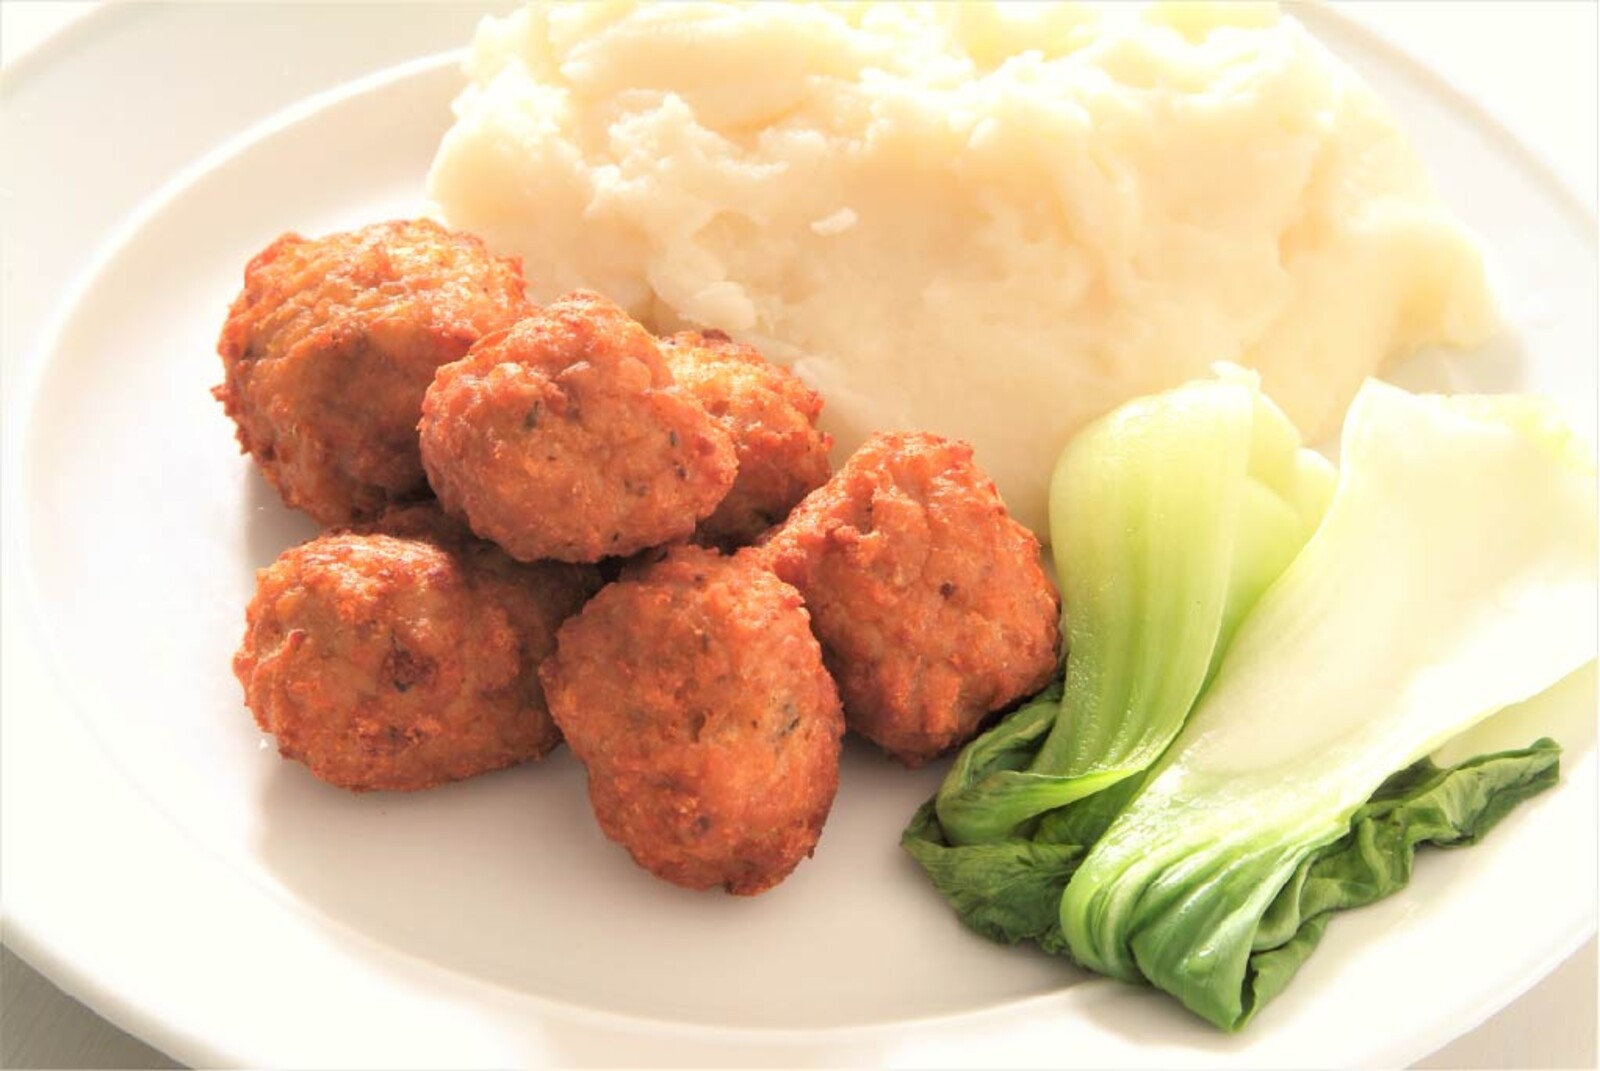 Cavos Products Chicken Meatballs